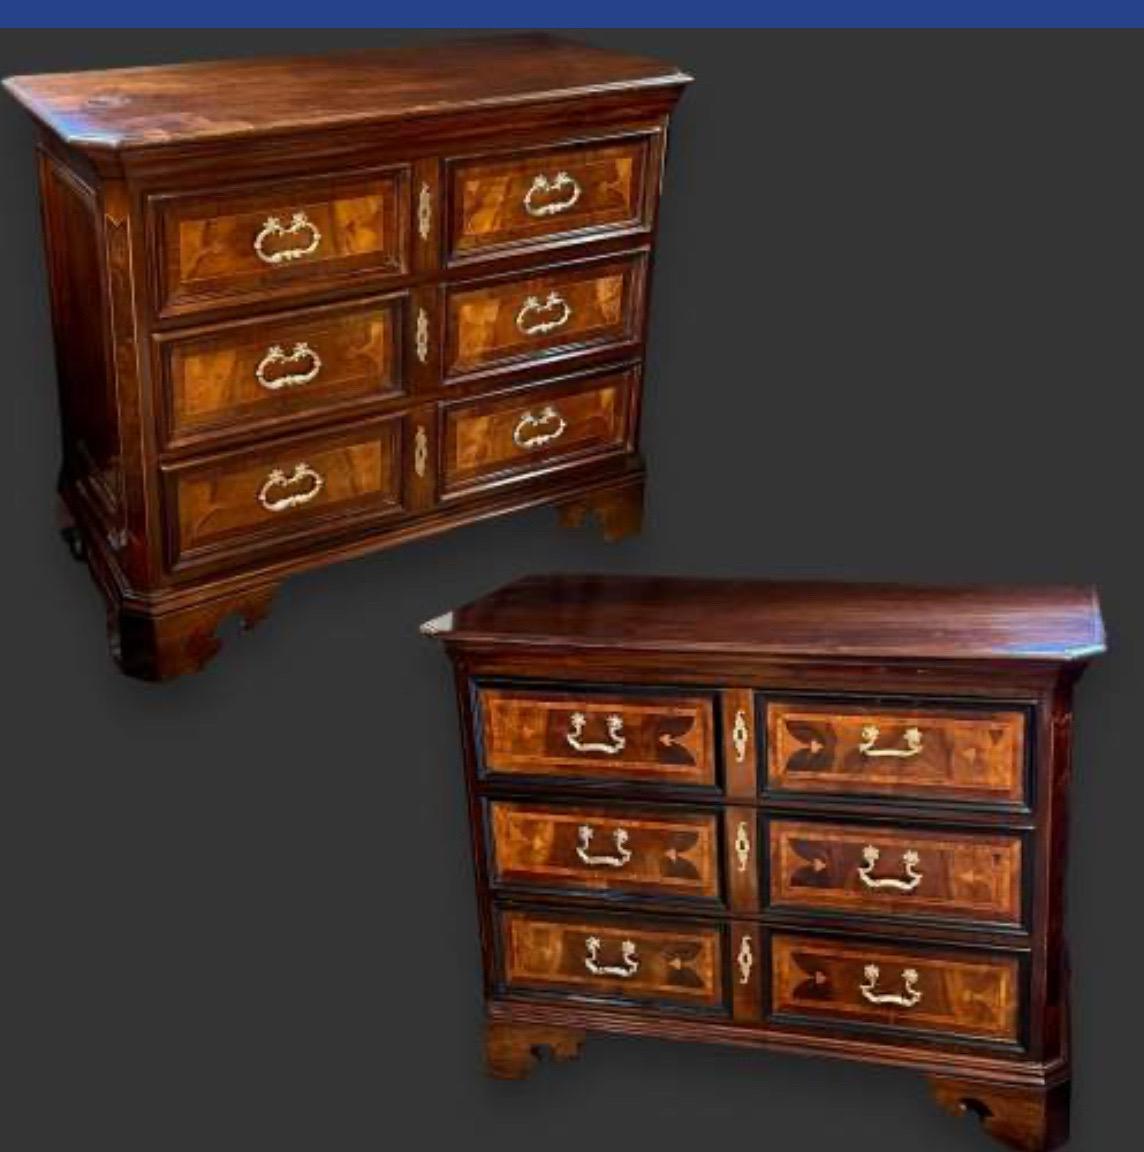  A Large 18th Century Northern Italian Chest of Drawers  For Sale 6